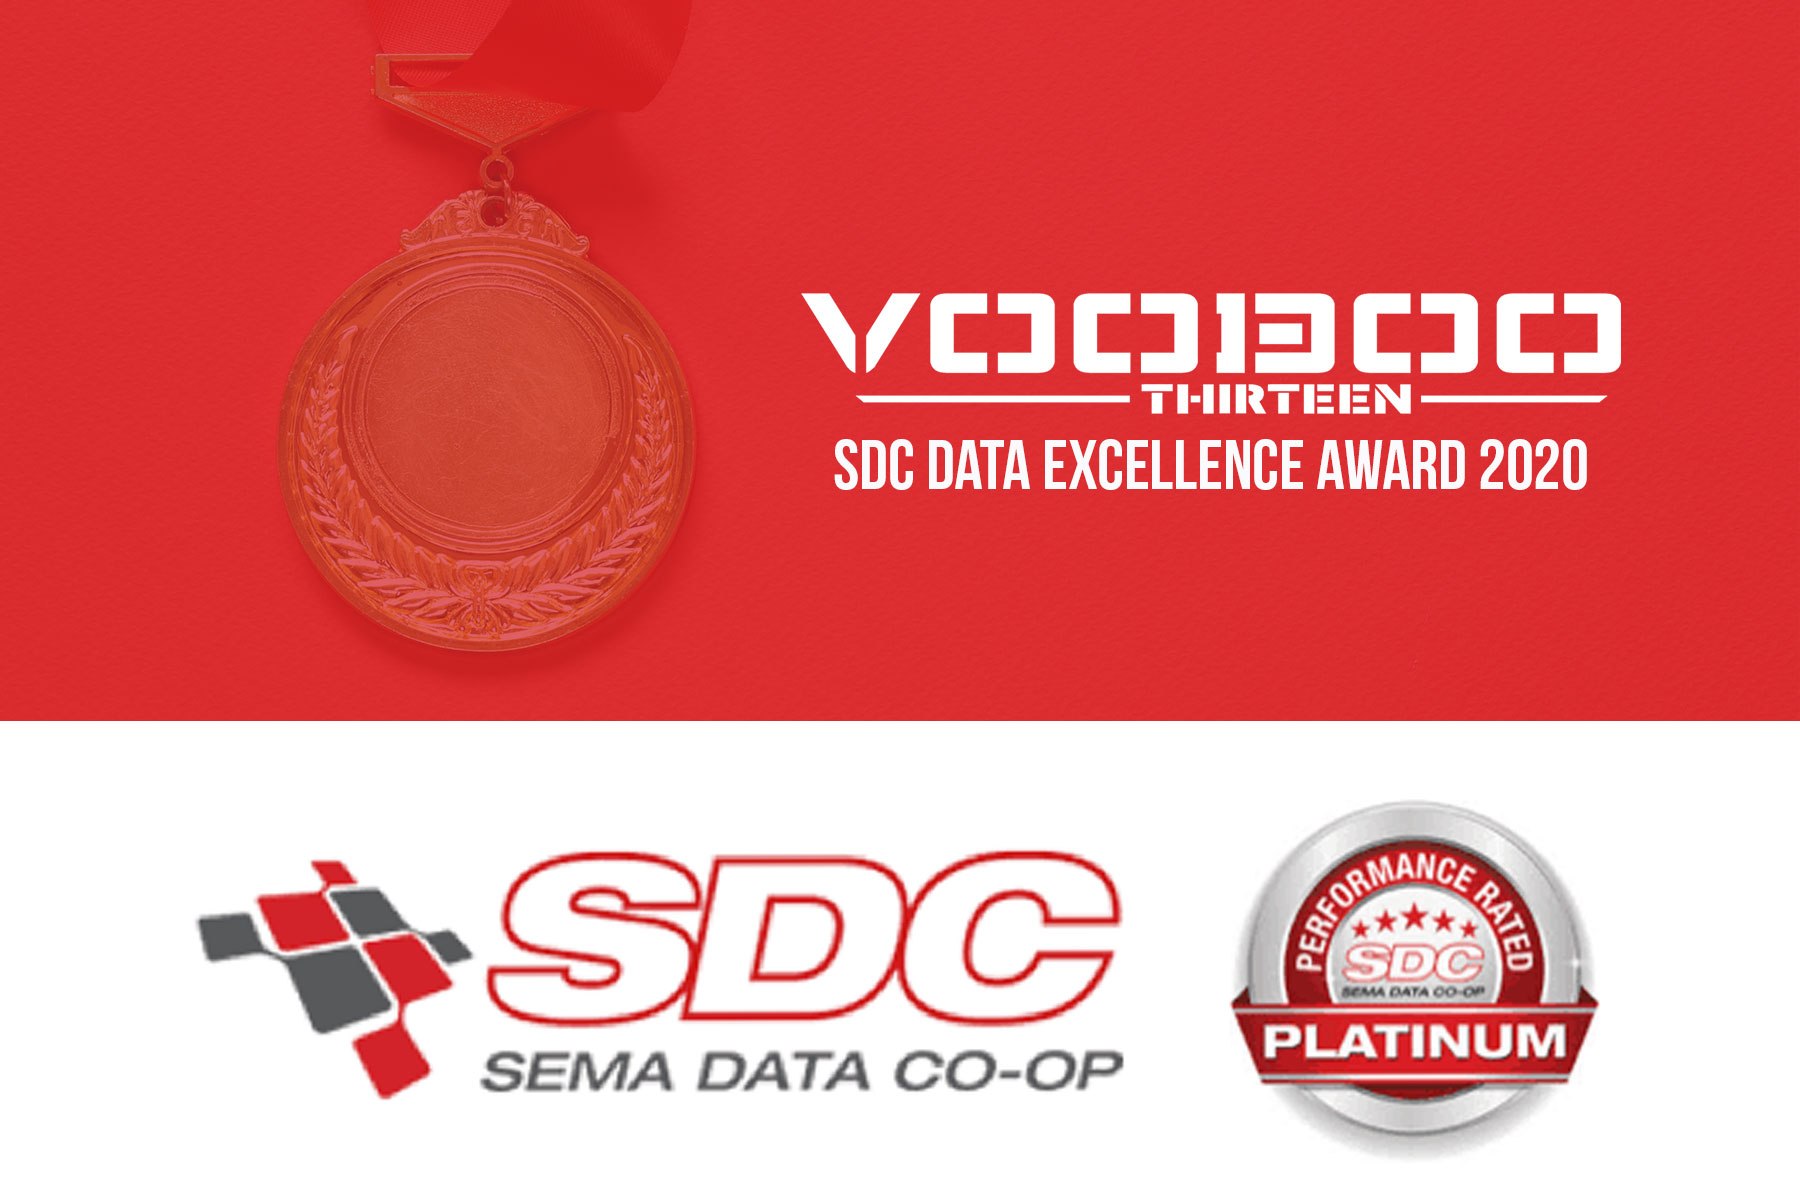 You are currently viewing Voodoo13 Honored with the SDC Data Excellence Award